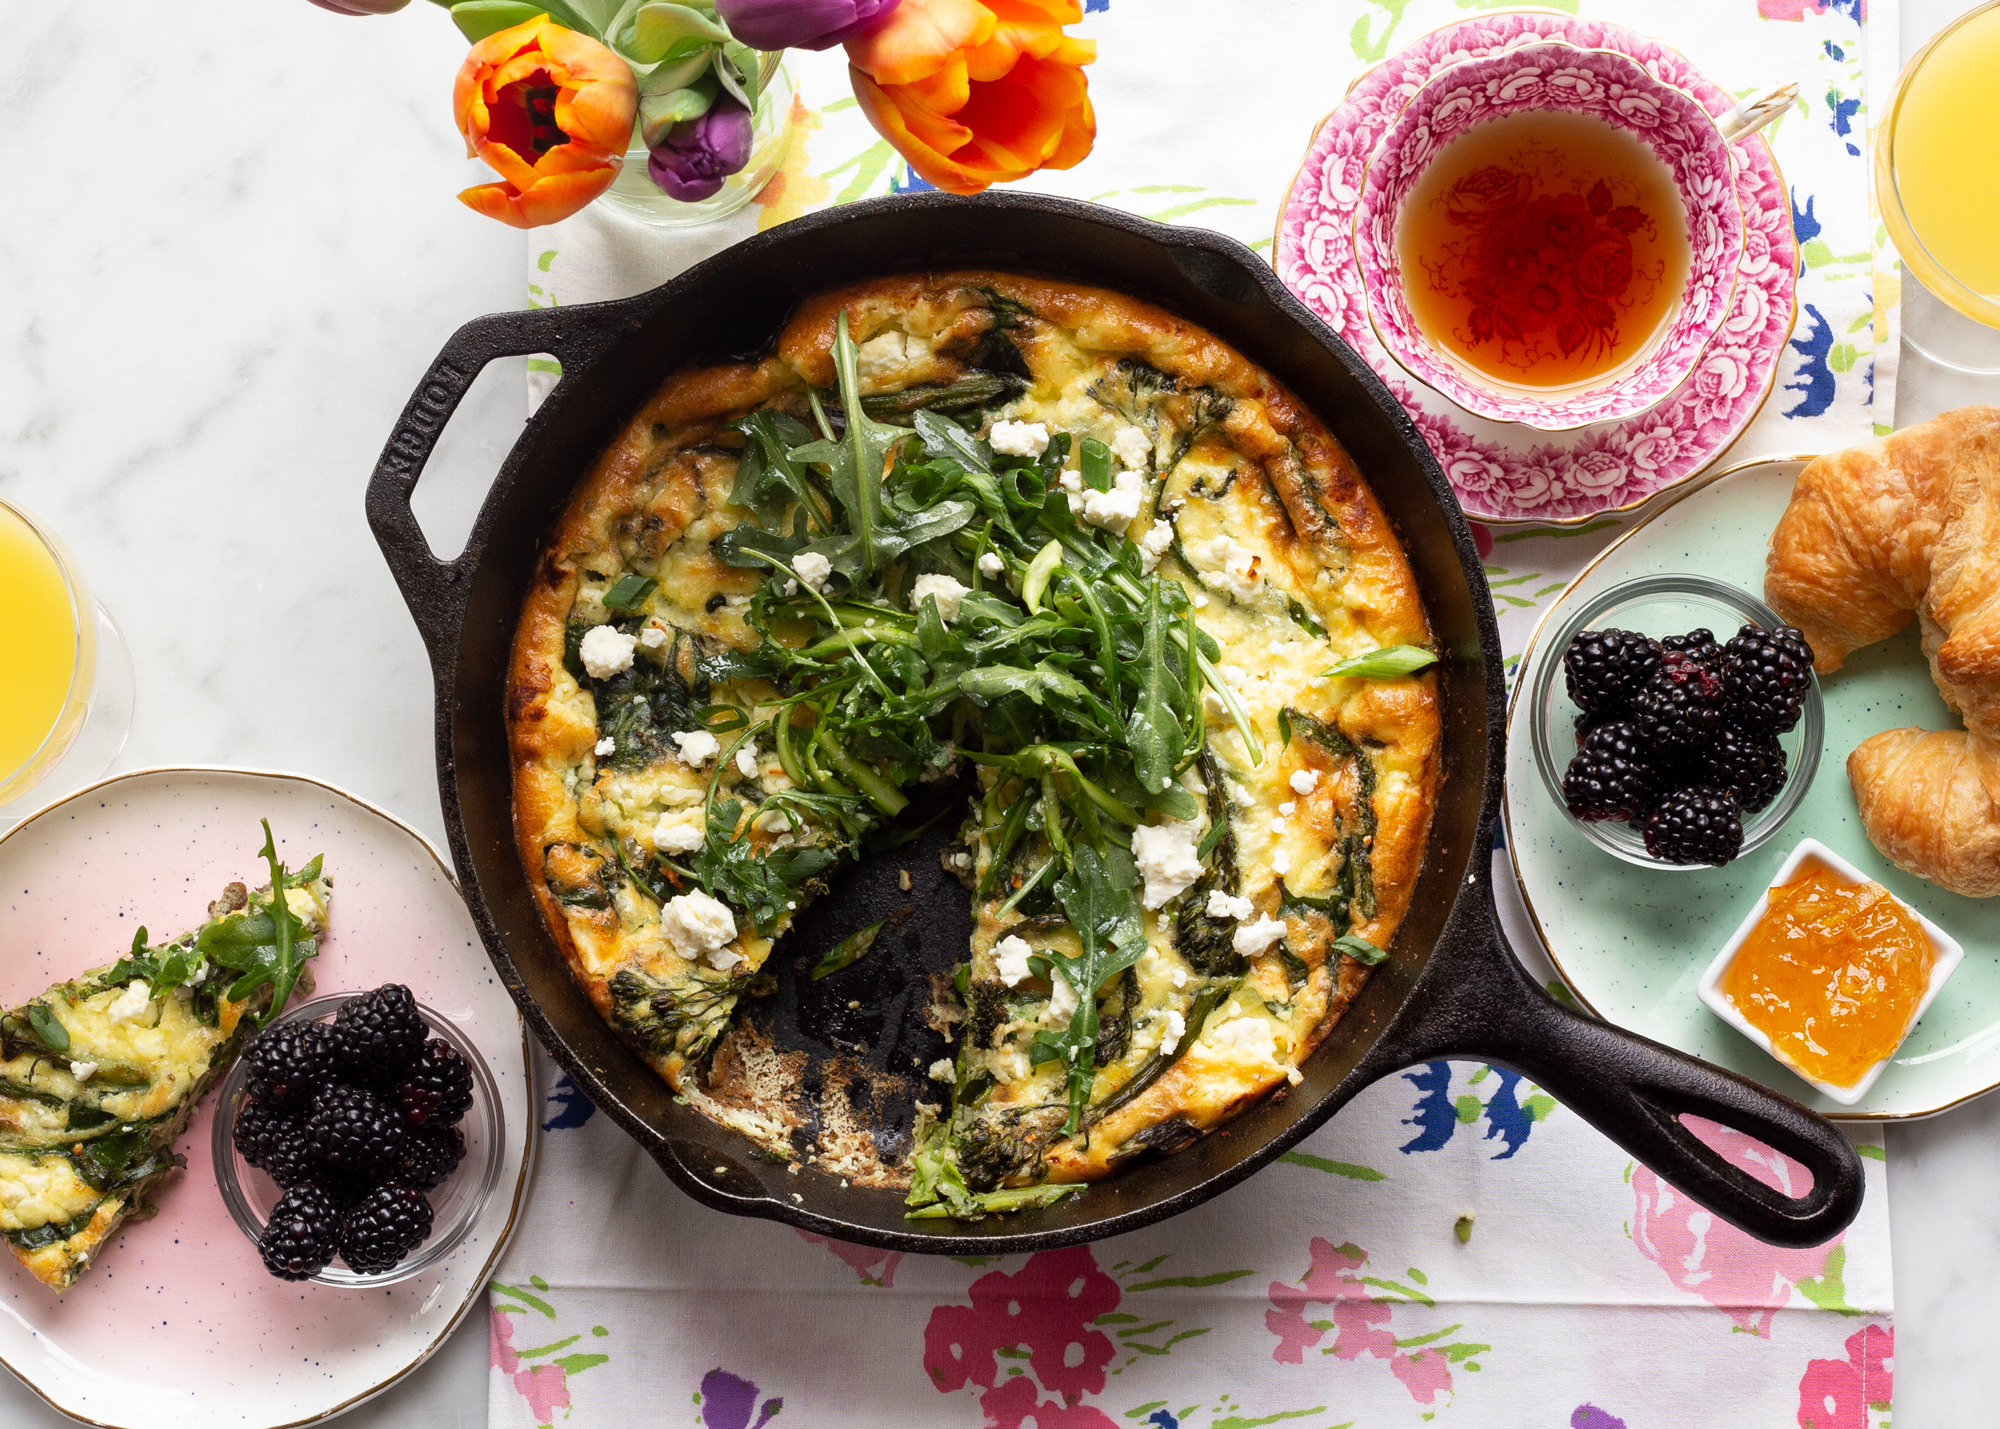 image of our Spring Veggie Fritata in a cast iron skillet on a table next to some tea and other brunch items like croissants